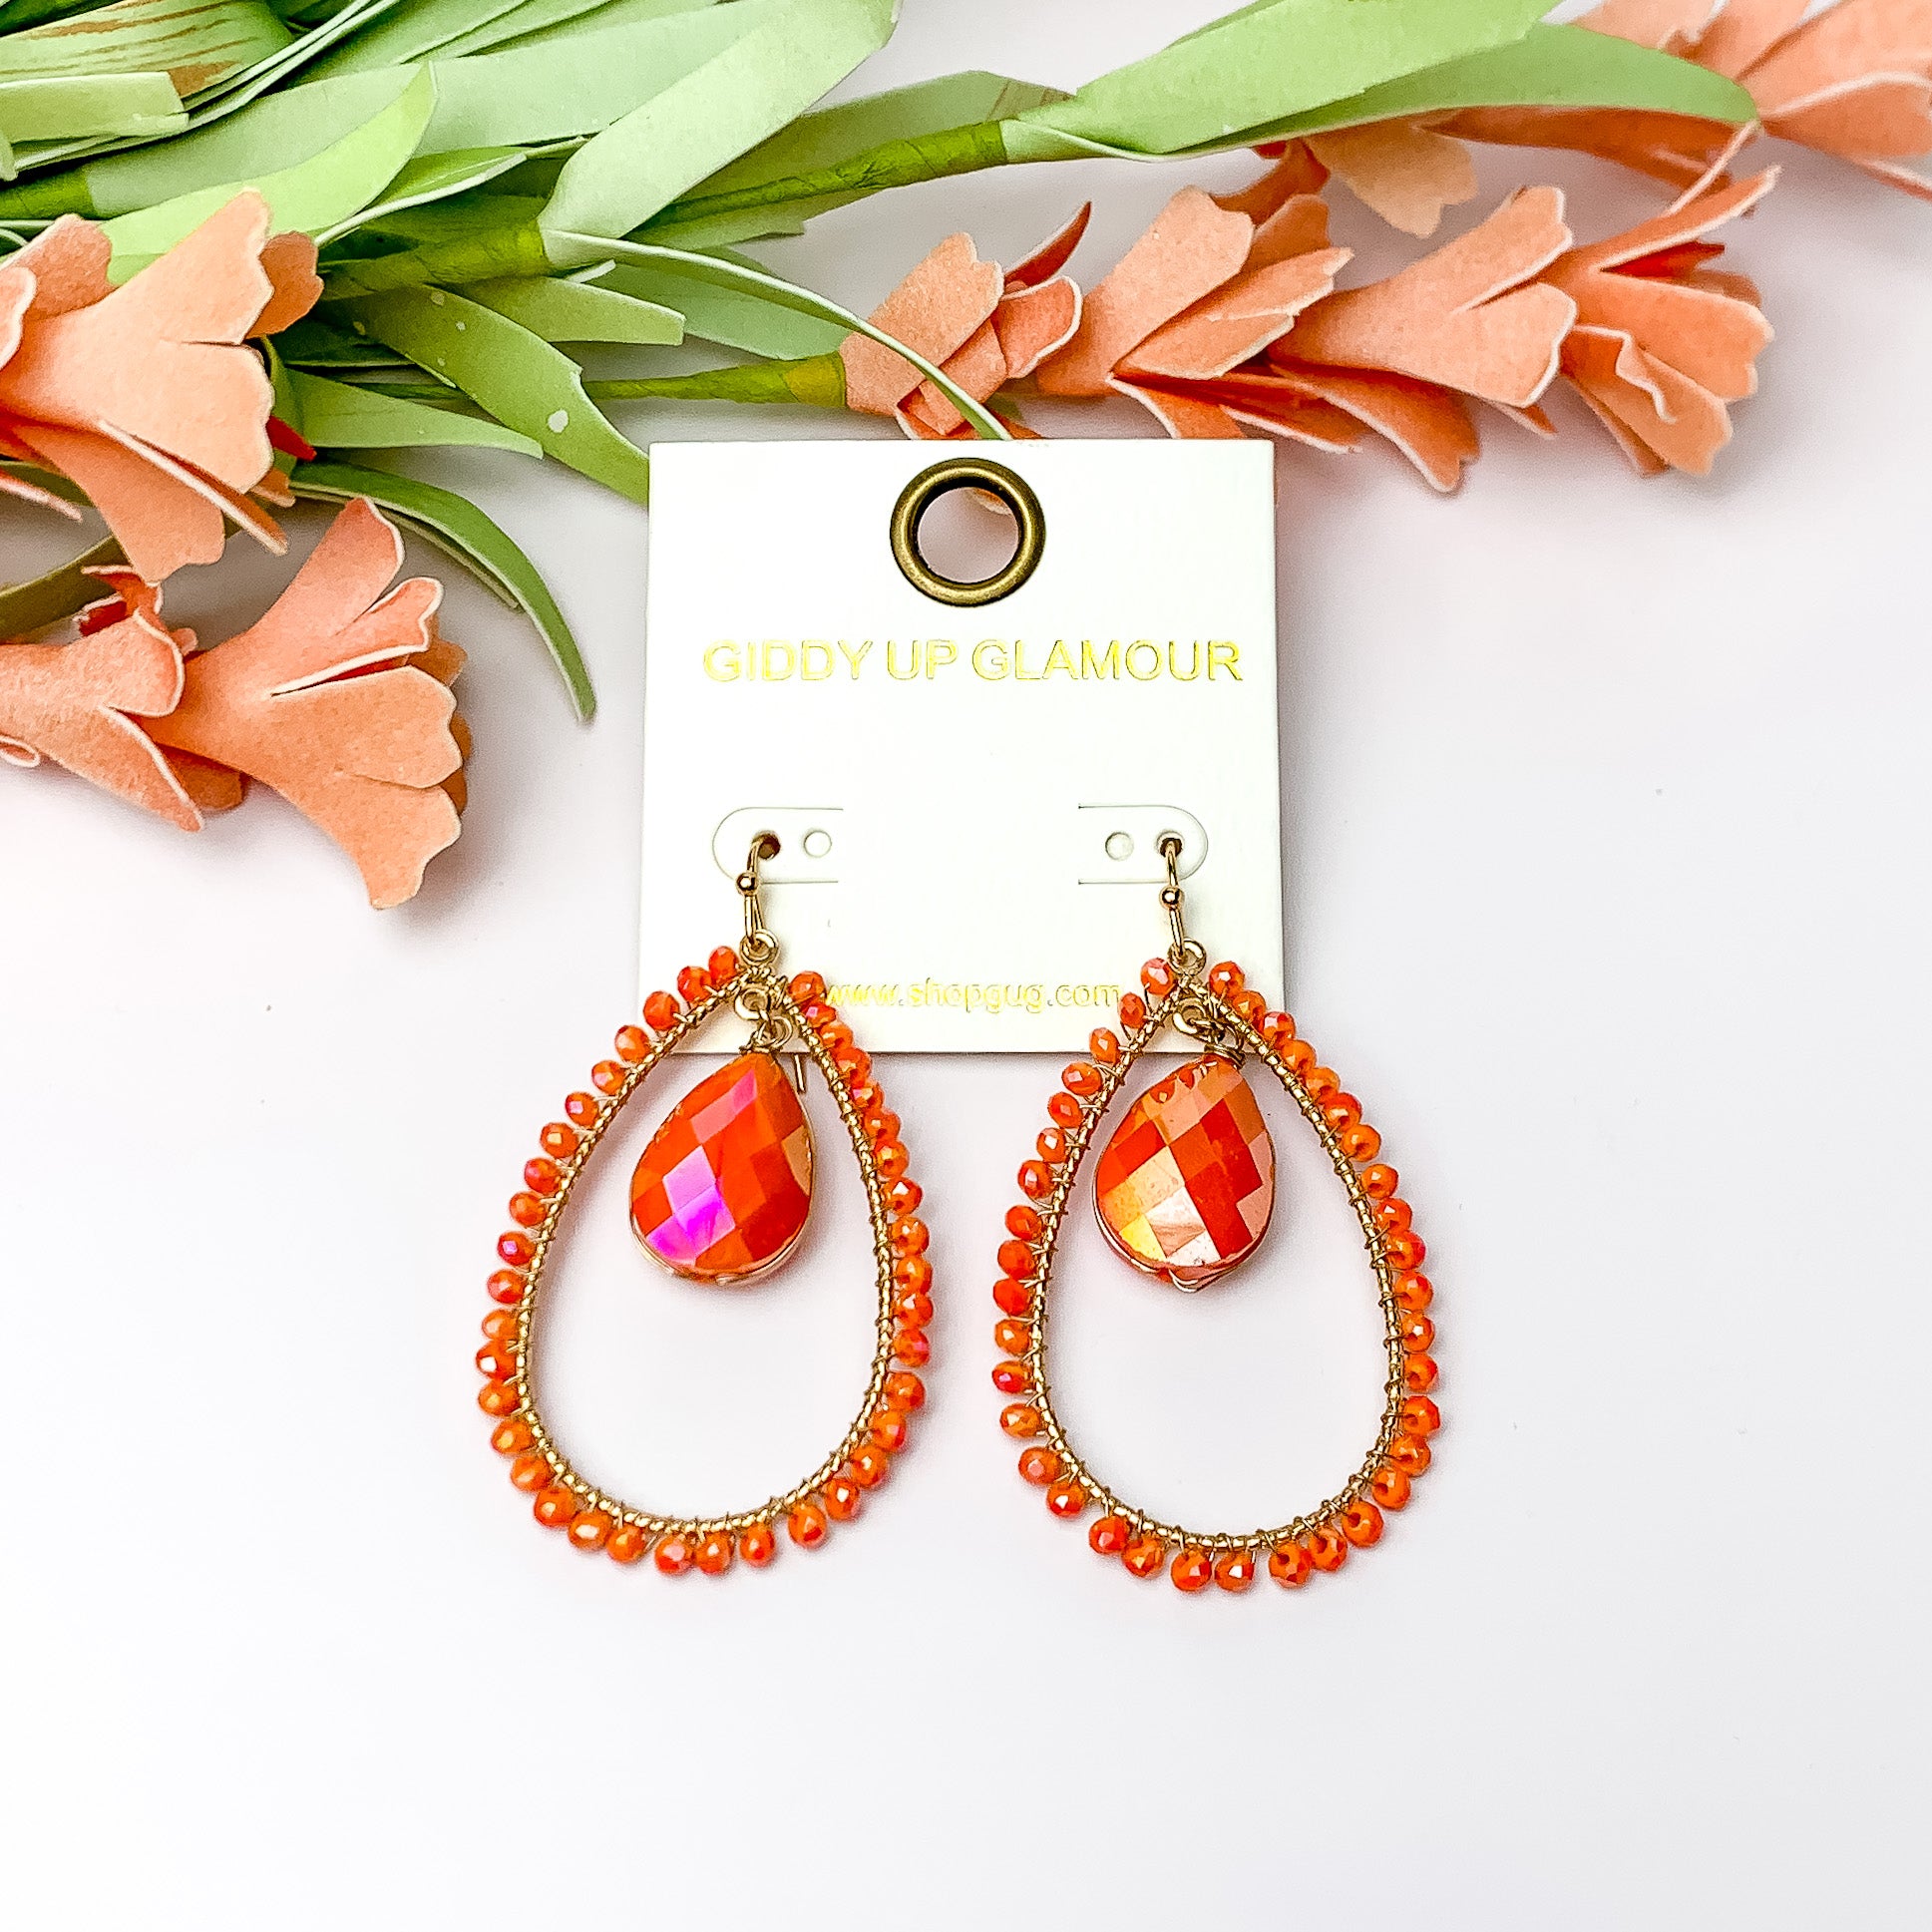 Orange Stone Inside Open Beaded Teardrop Earrings with Gold Tone Outline. Pictured on a white background with flowers at the top.